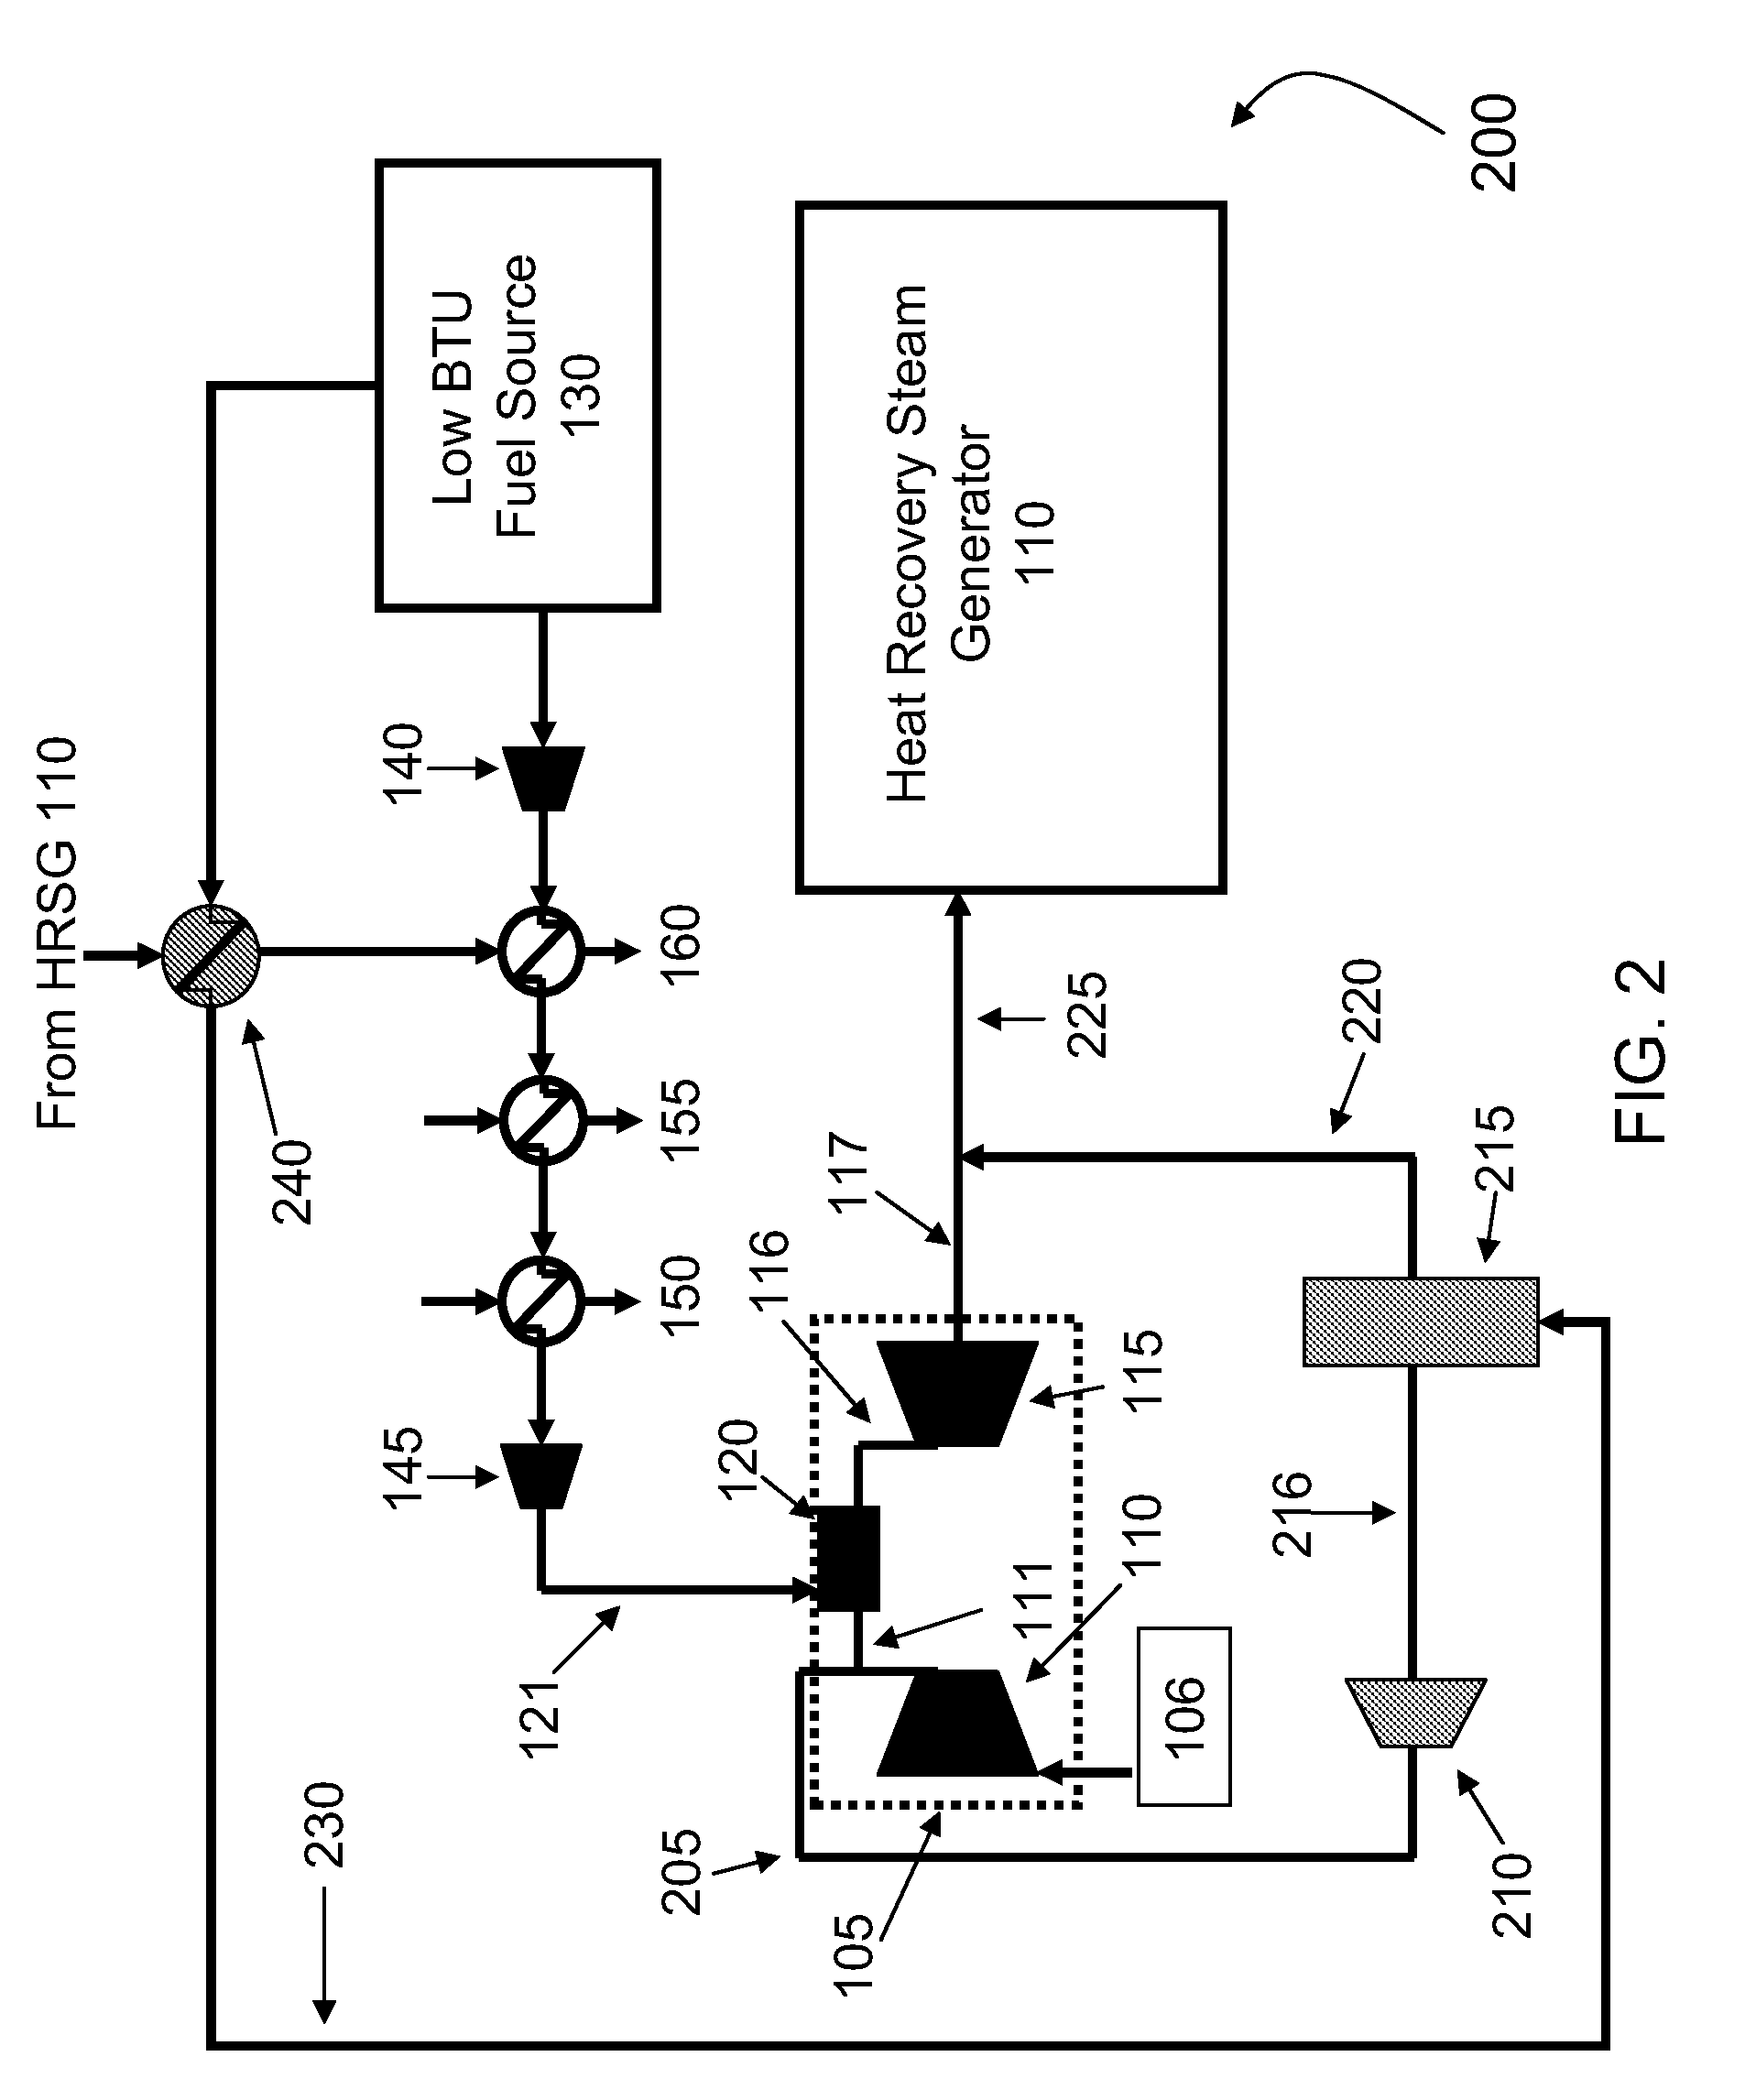 Systems, Methods, and Apparatus for Modifying Power Output and Efficiency of a Combined Cycle Power Plant